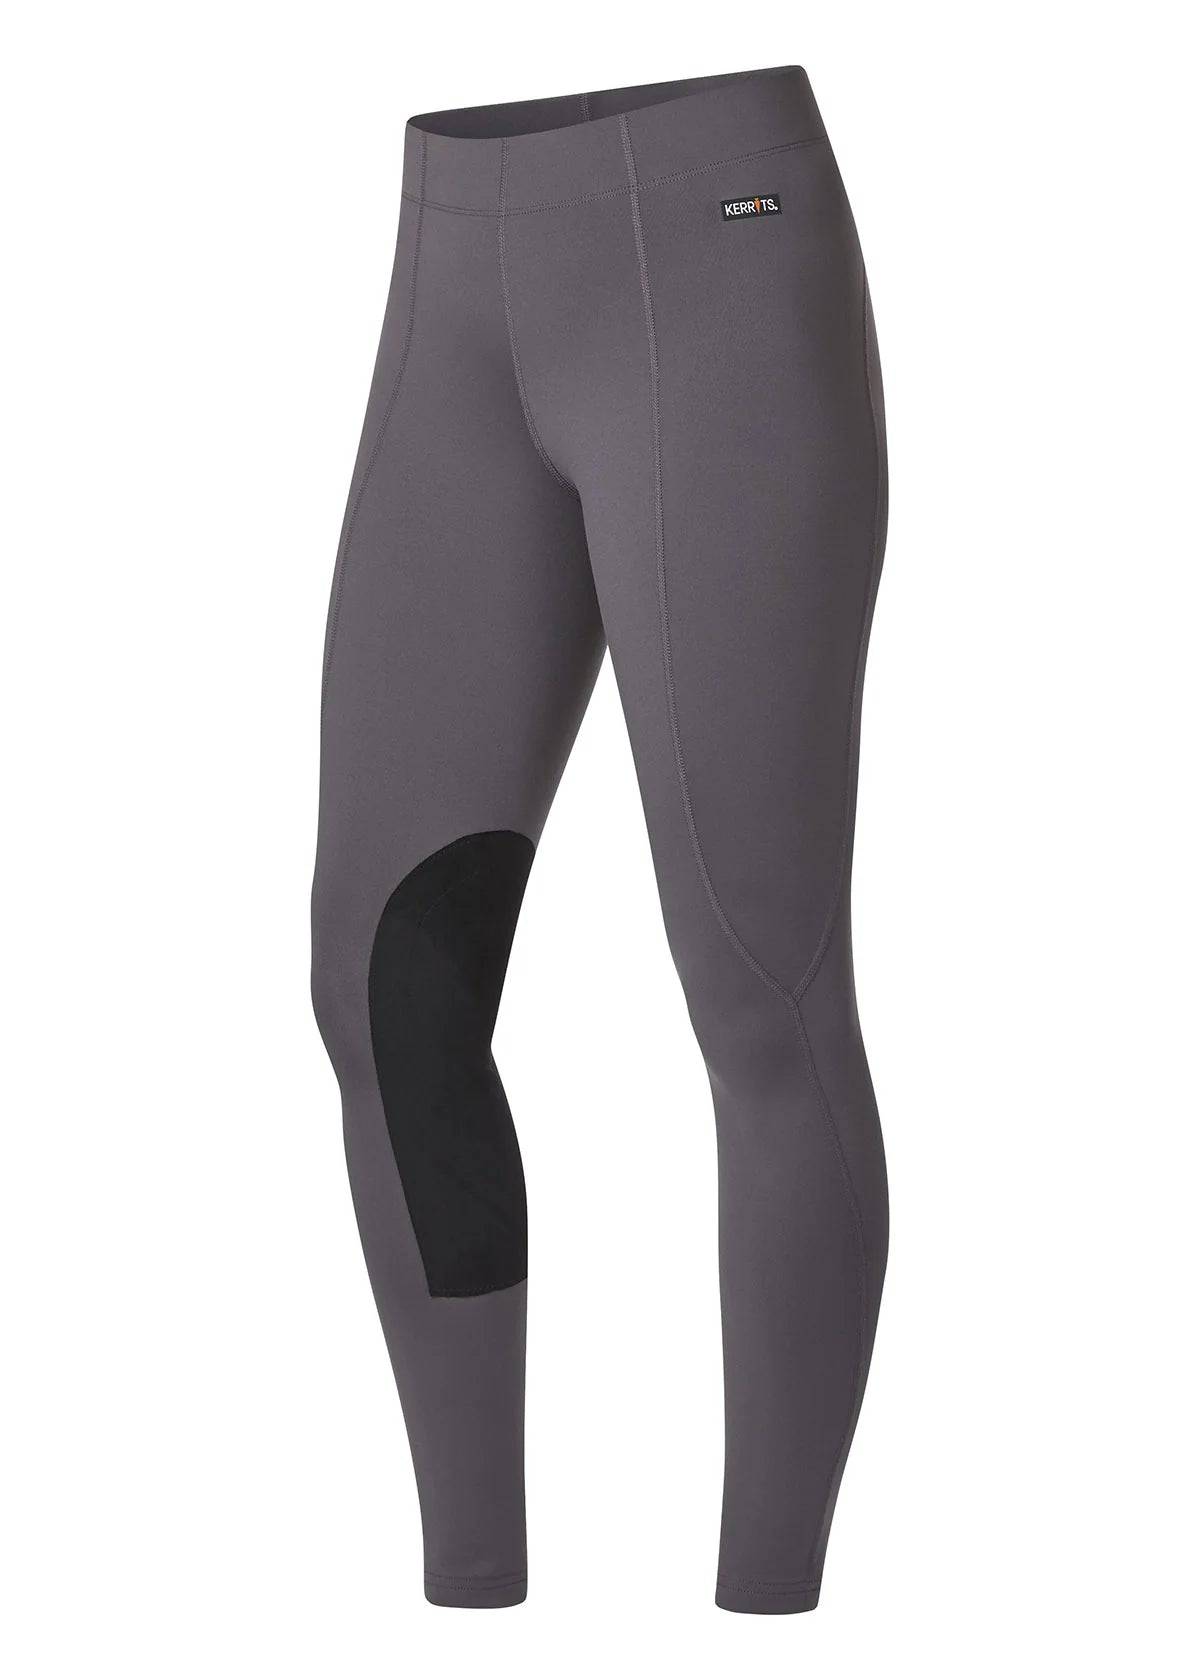 Kerrits Flow Rise Knee Patch Performance Tight - CLEARANCE - Equine Exchange Tack Shop